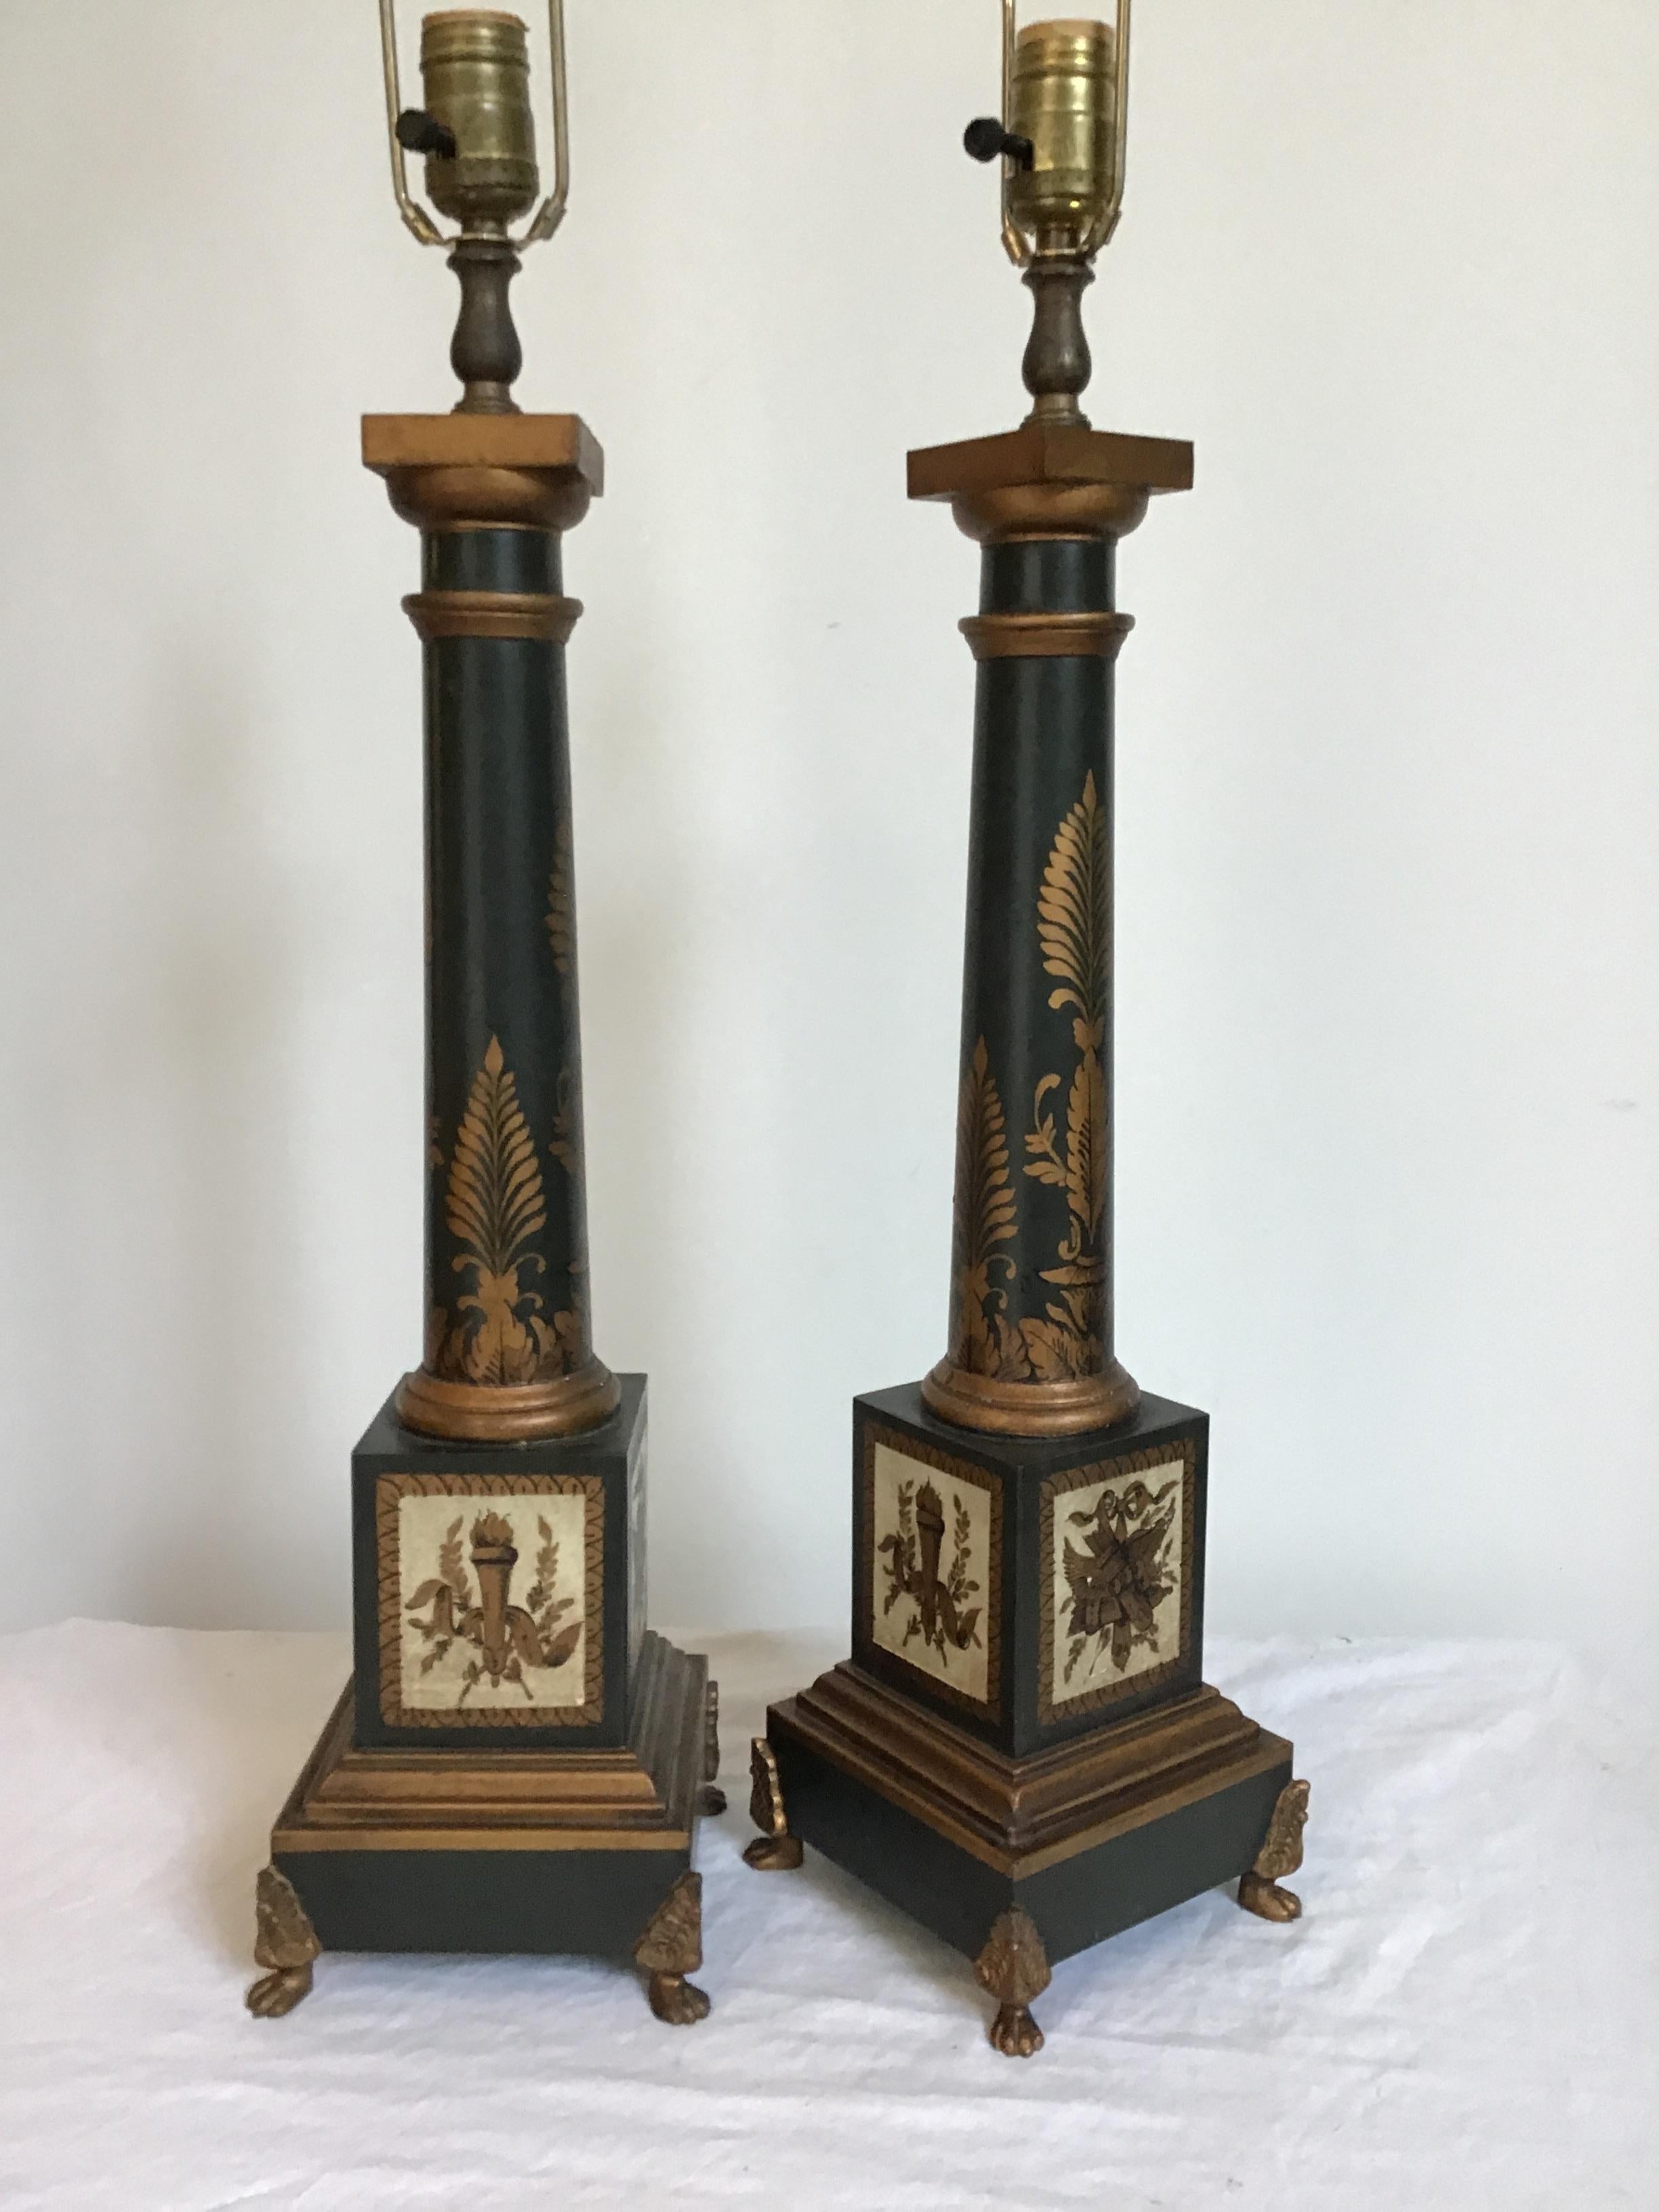 Pair of French hand painted tole classical lamps. Out of a Greenwich, Connecticut estate. Signed on bottom.